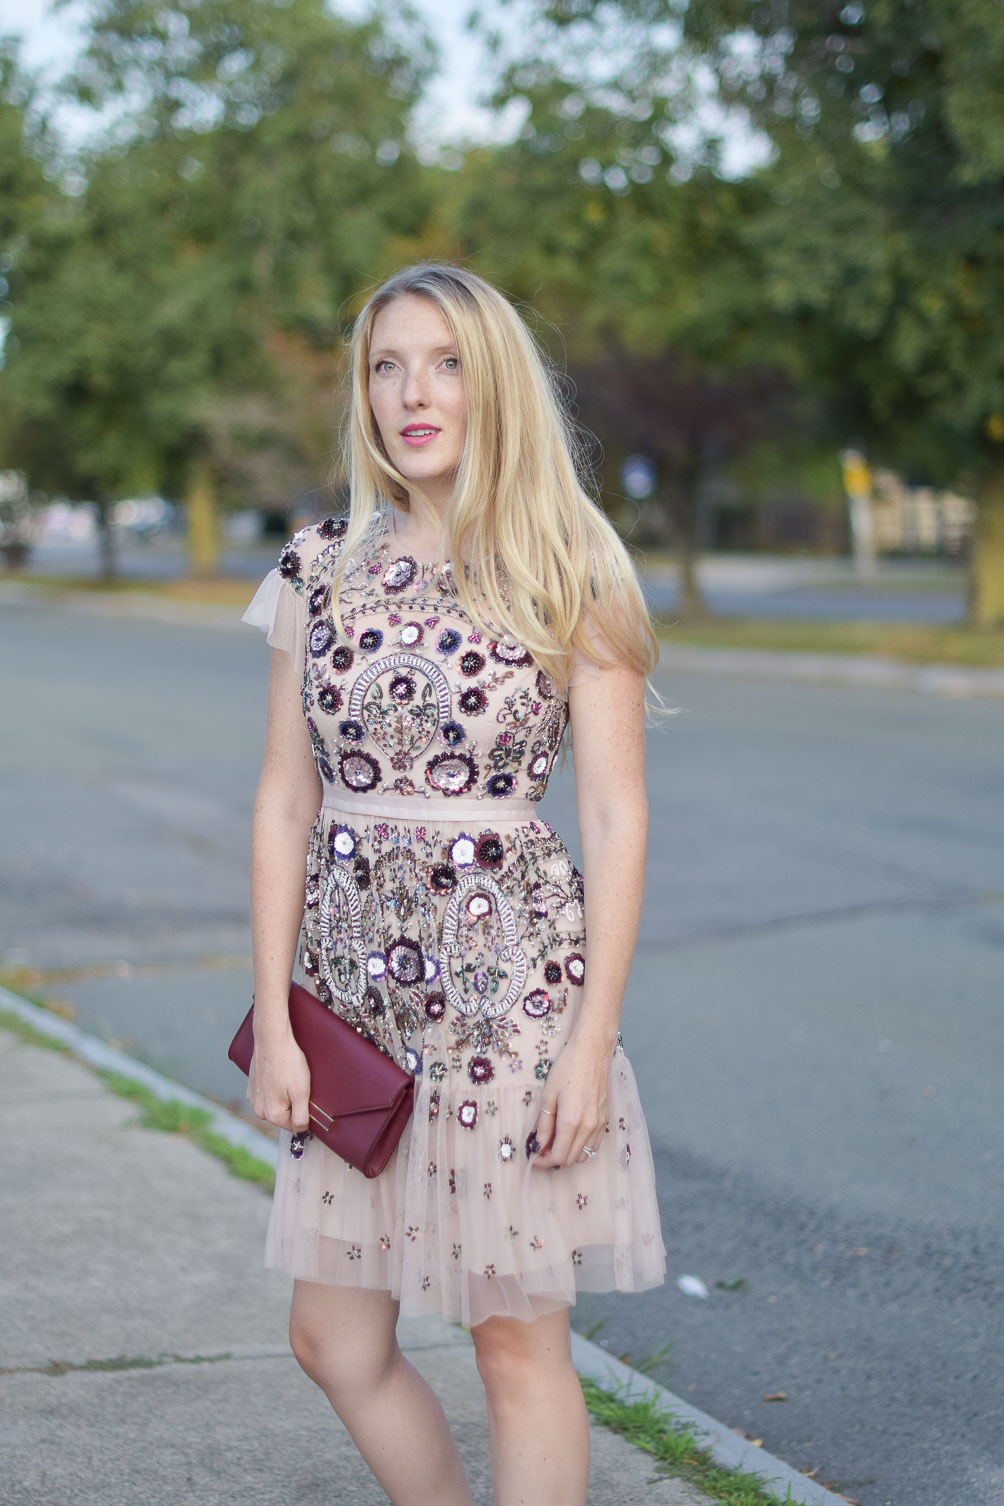 what i wore to the rewardStyle party - Needle & Thread beaded dress from BHLDN on Leslie Musser one brass fox